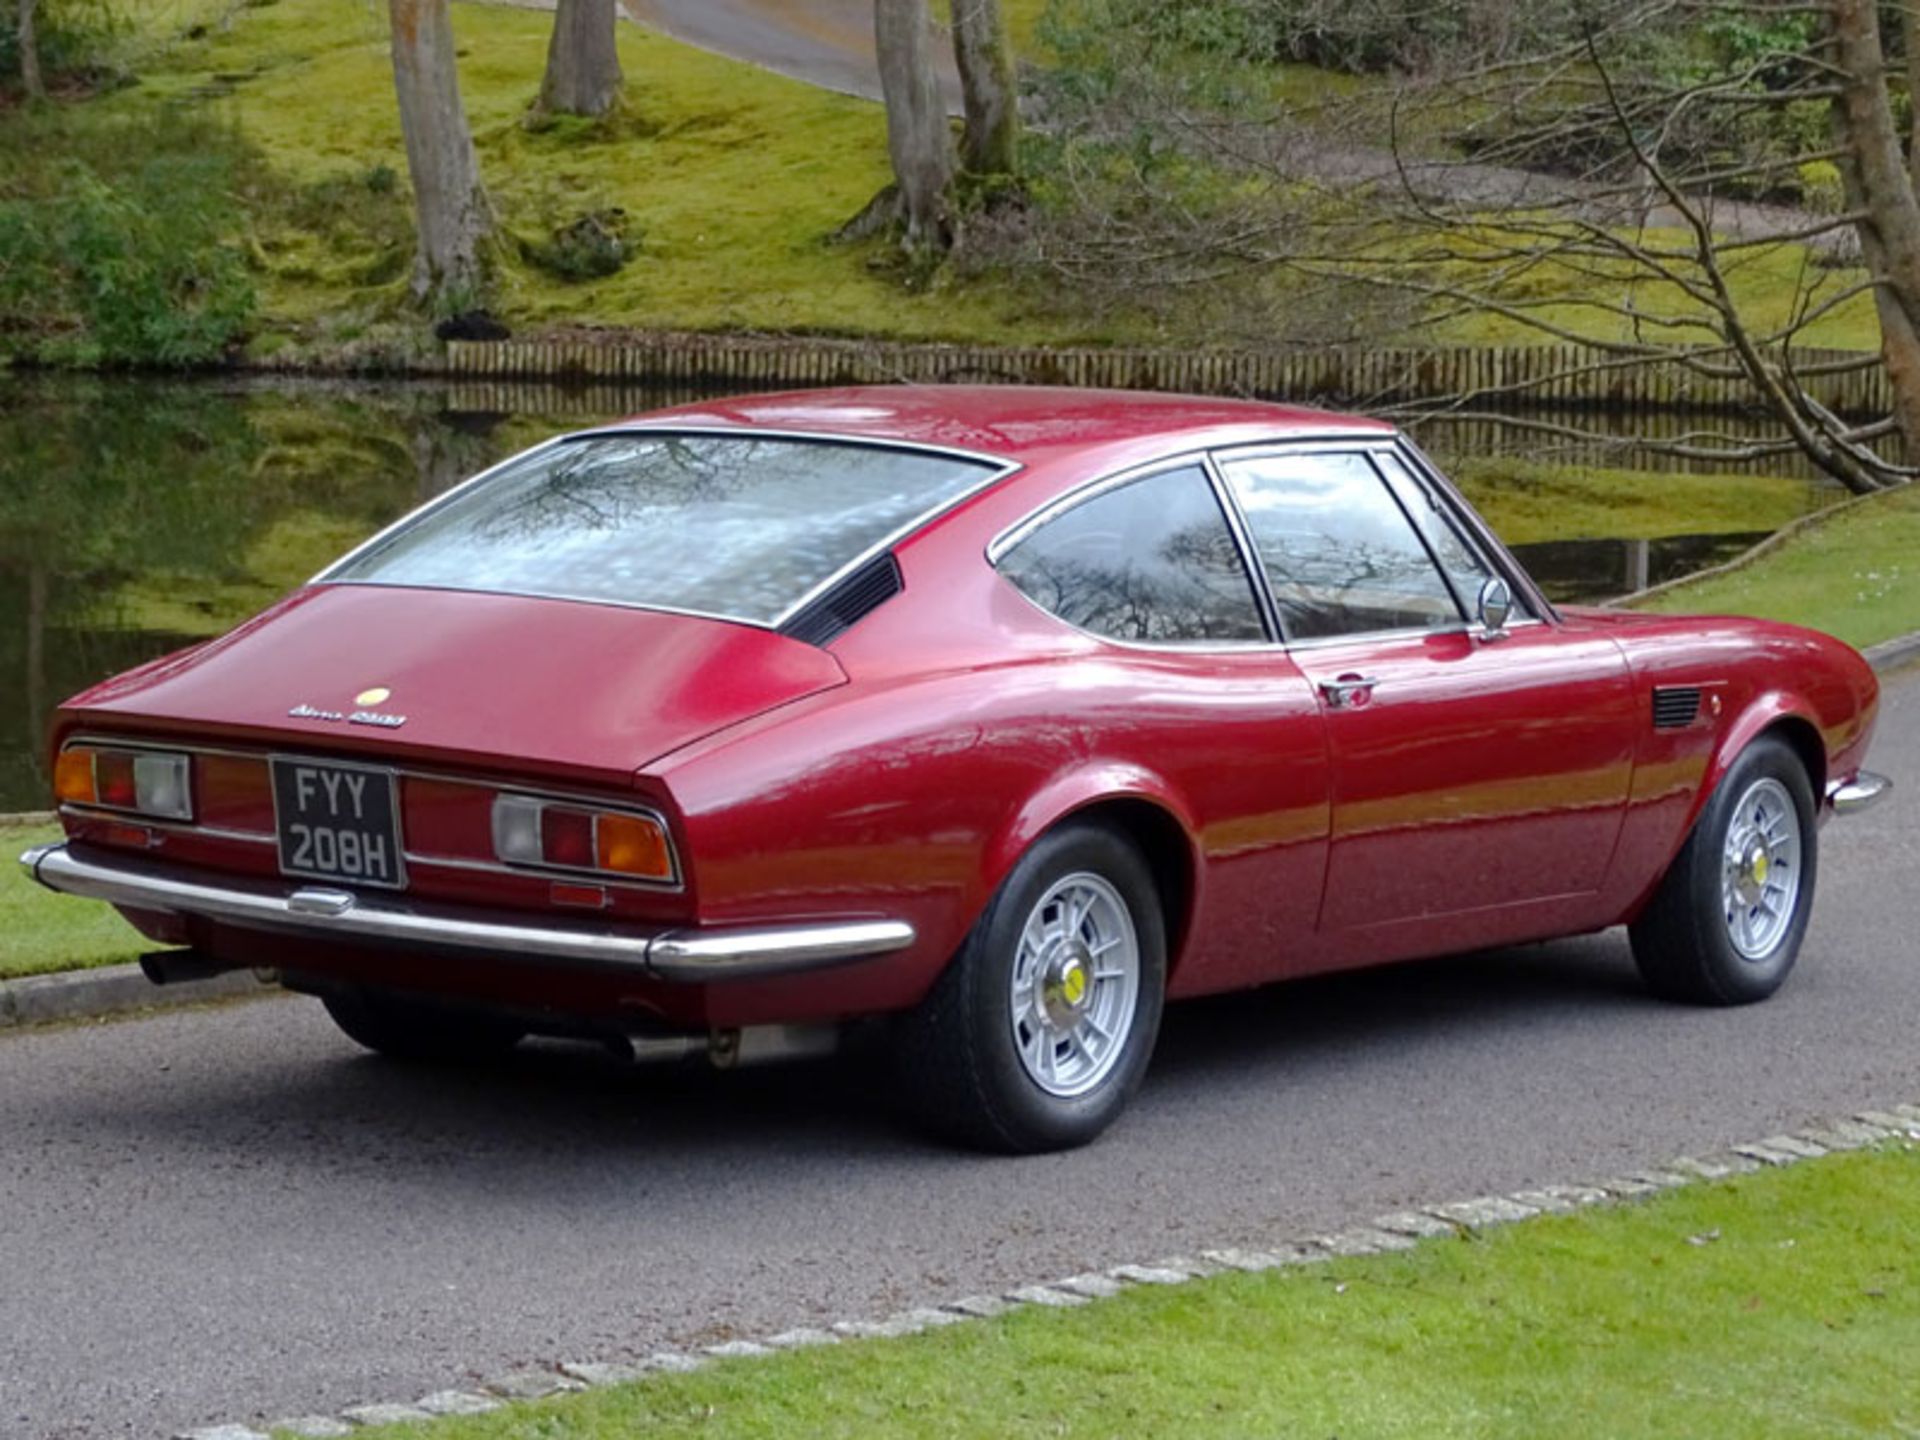 1969 Fiat Dino 2400 Coupe - Image 5 of 13